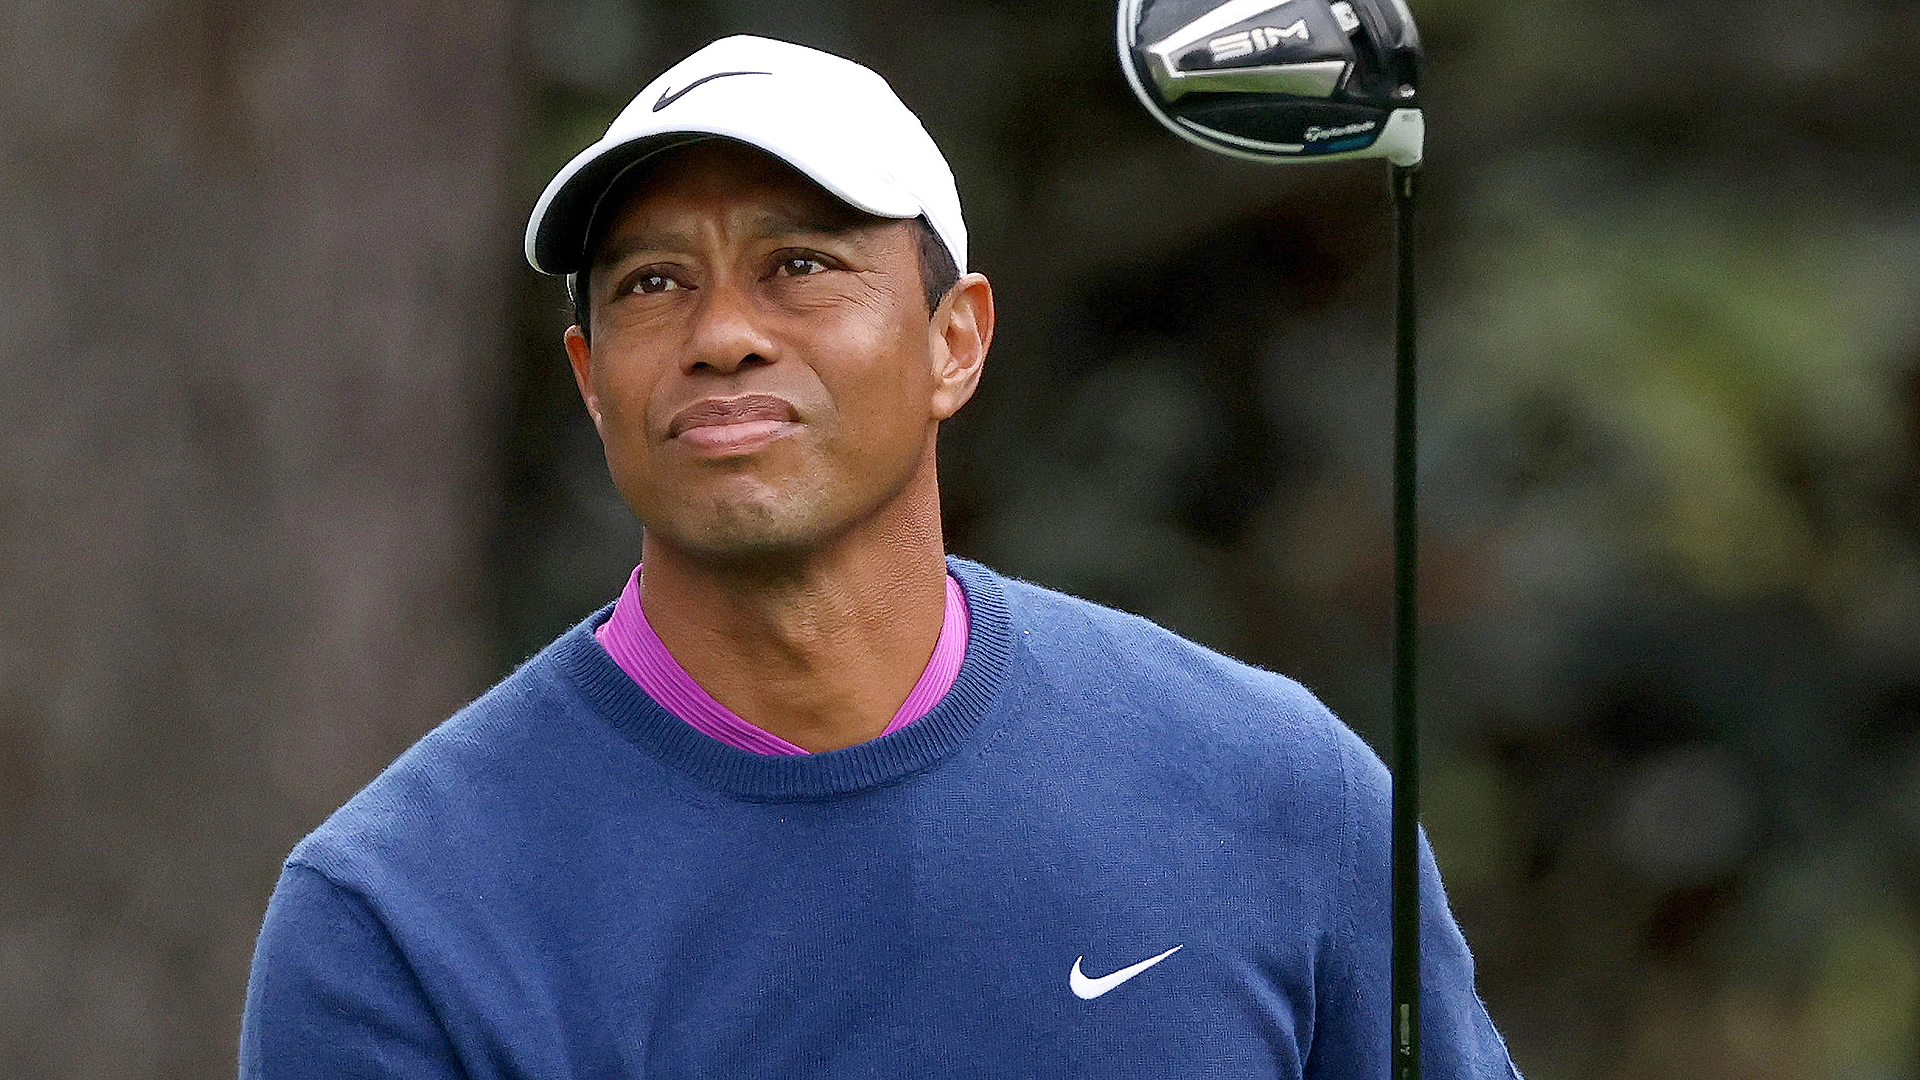 Golf Central Podcast: Reacting (not overreacting) to Tiger; Thanksgiving food overrated?